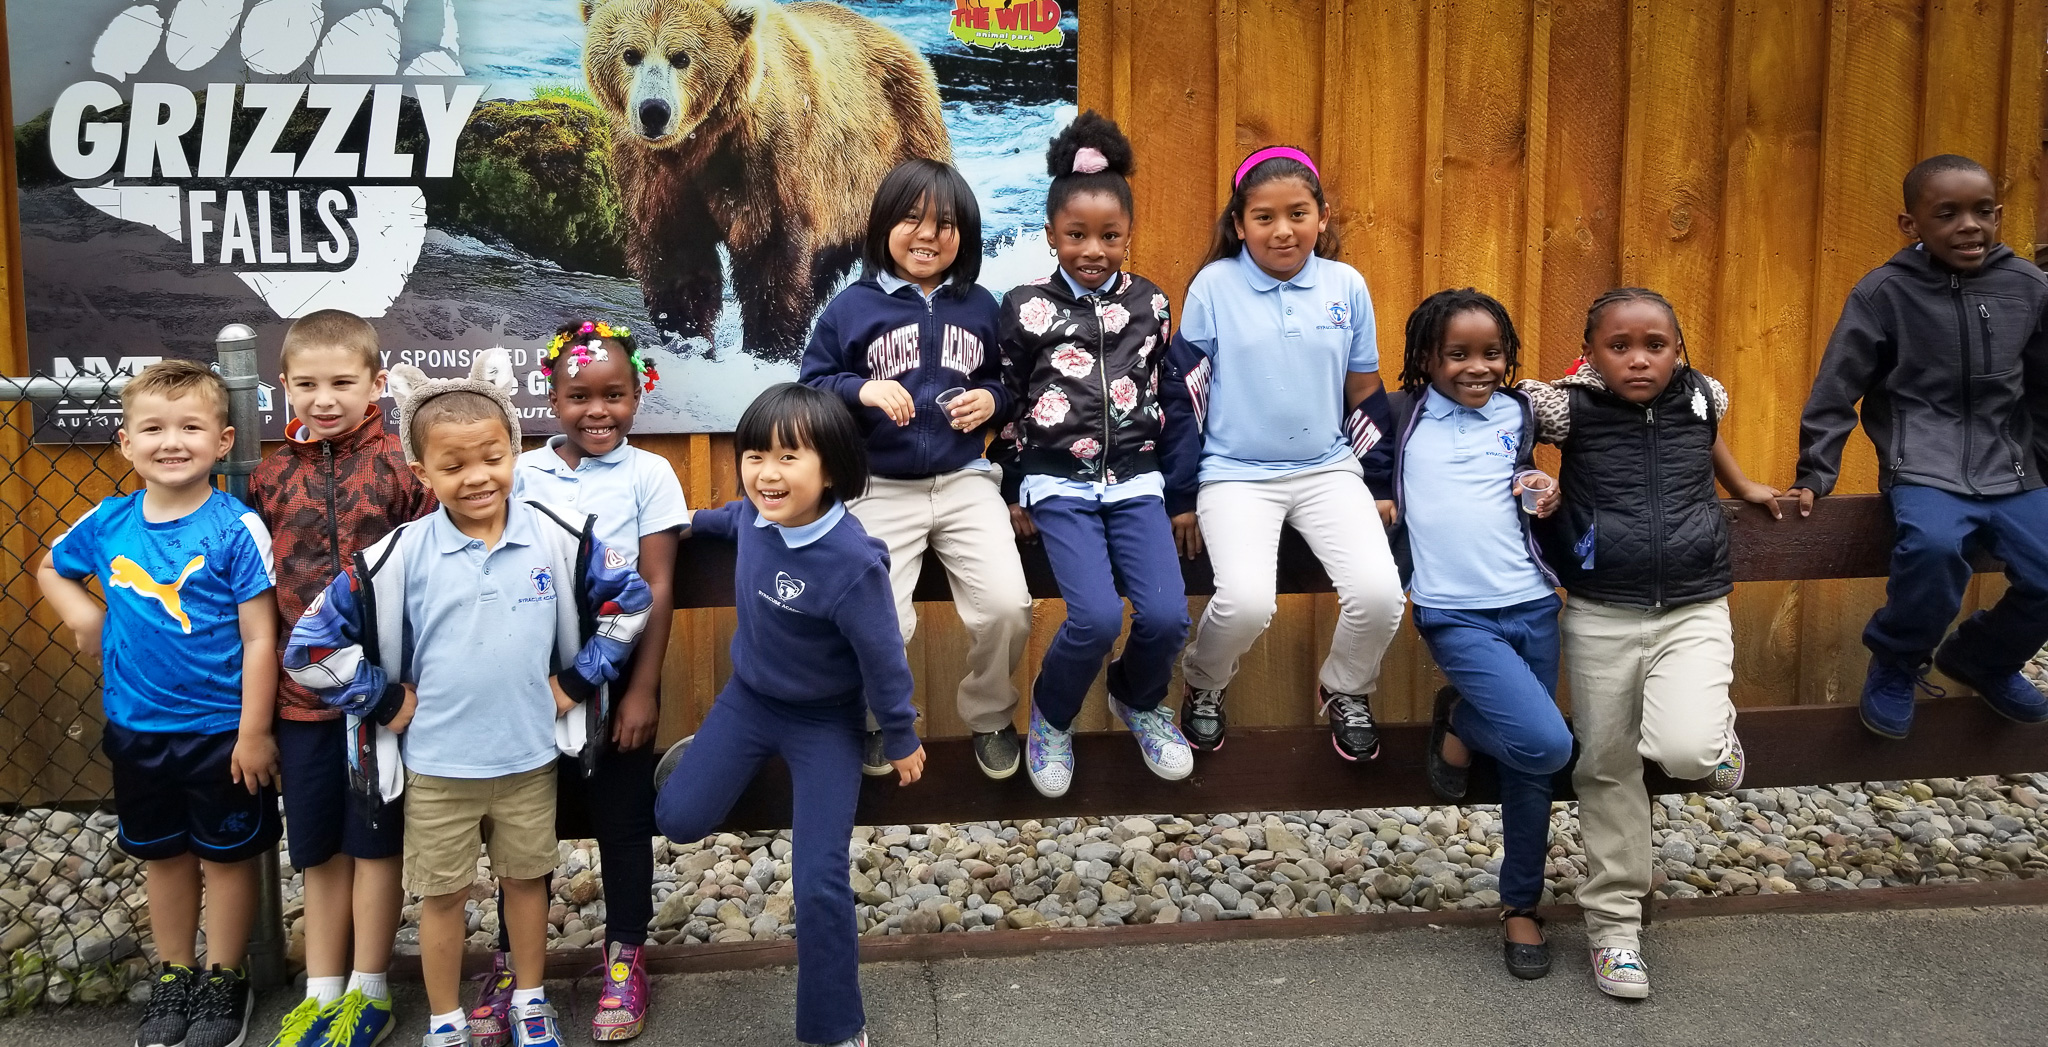 First grade Atoms take a field trip to The Wild Animal Park